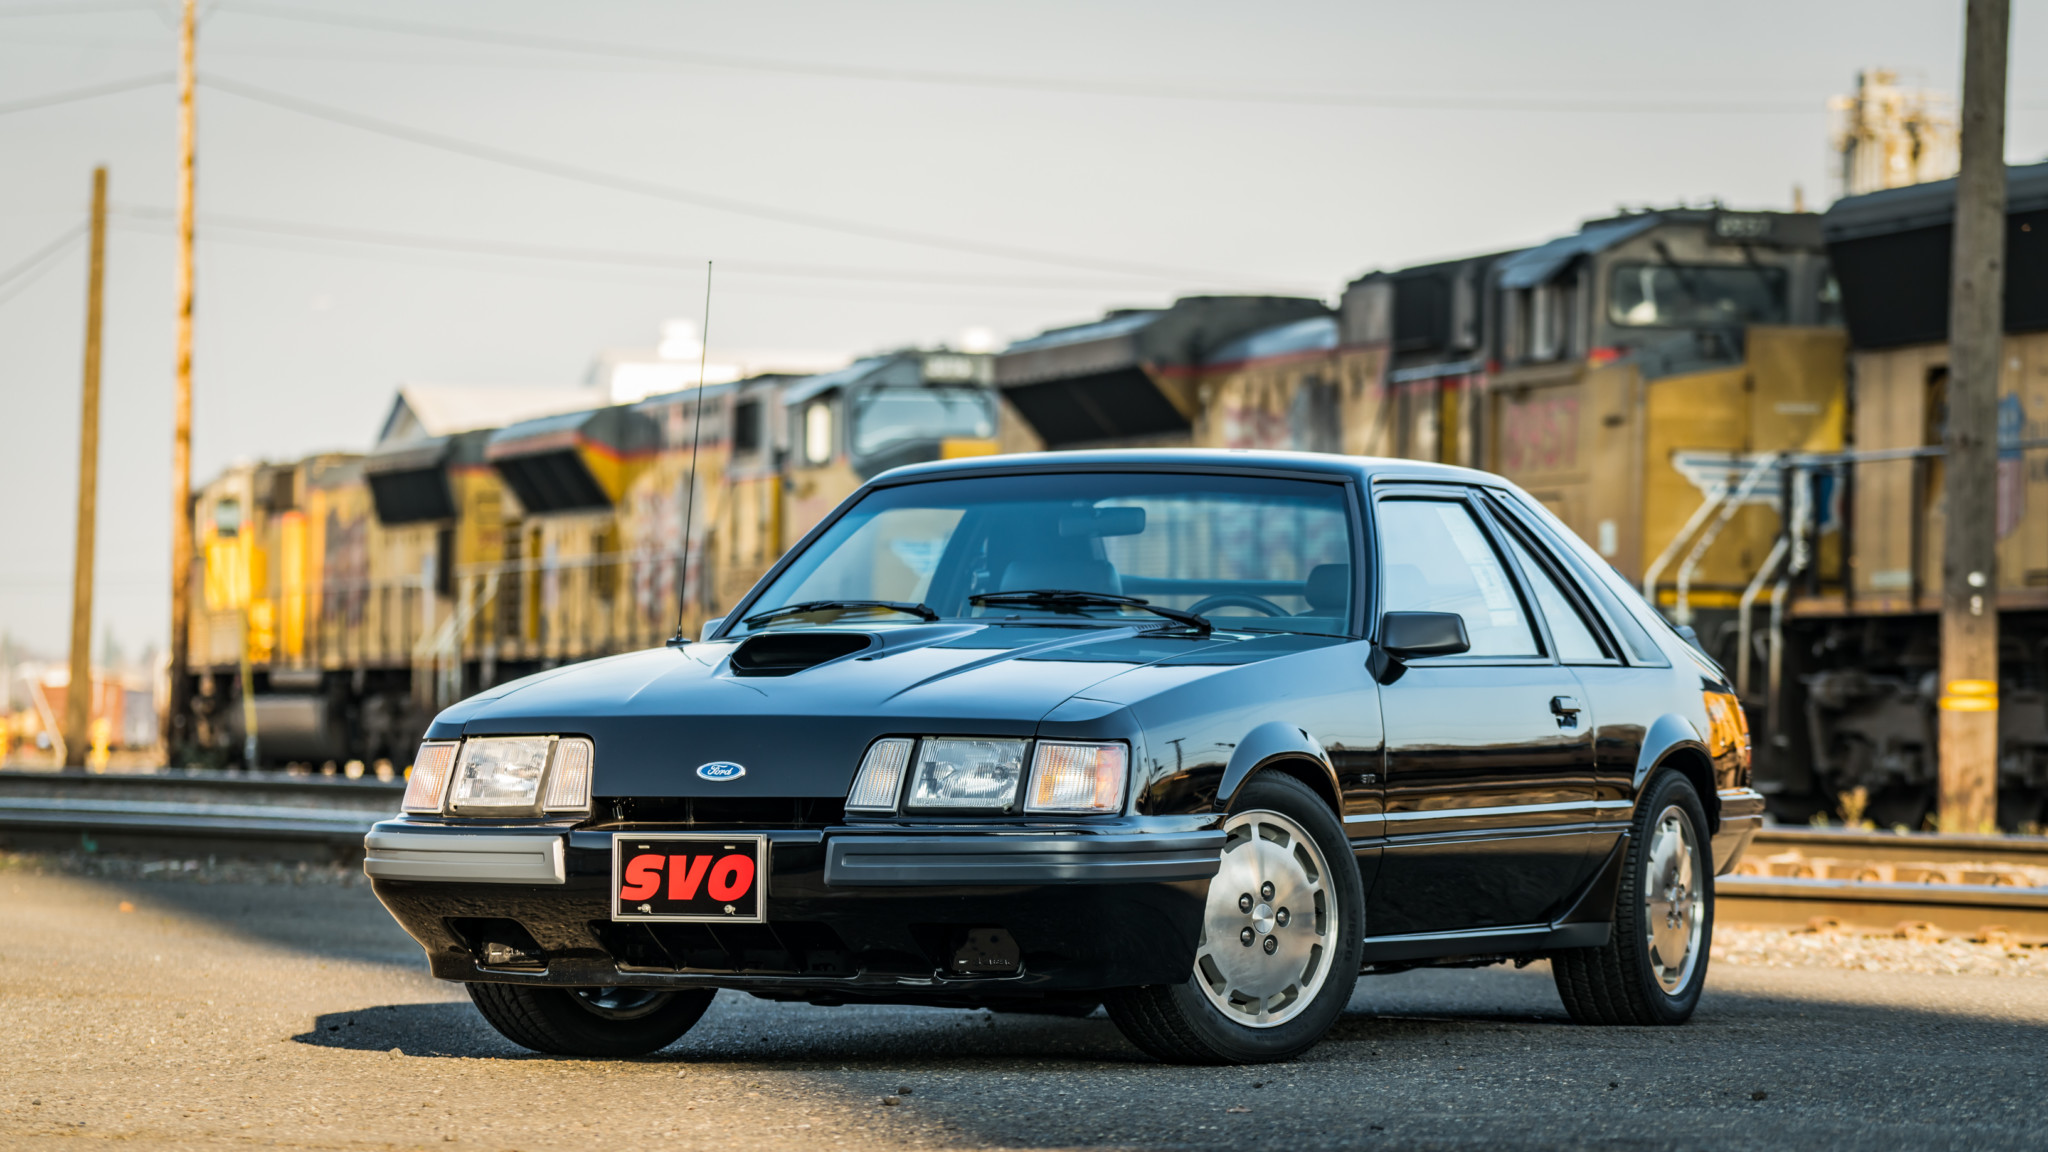 1986 Ford Mustang Svo Hd Wallpaper Background Image 2048x1152